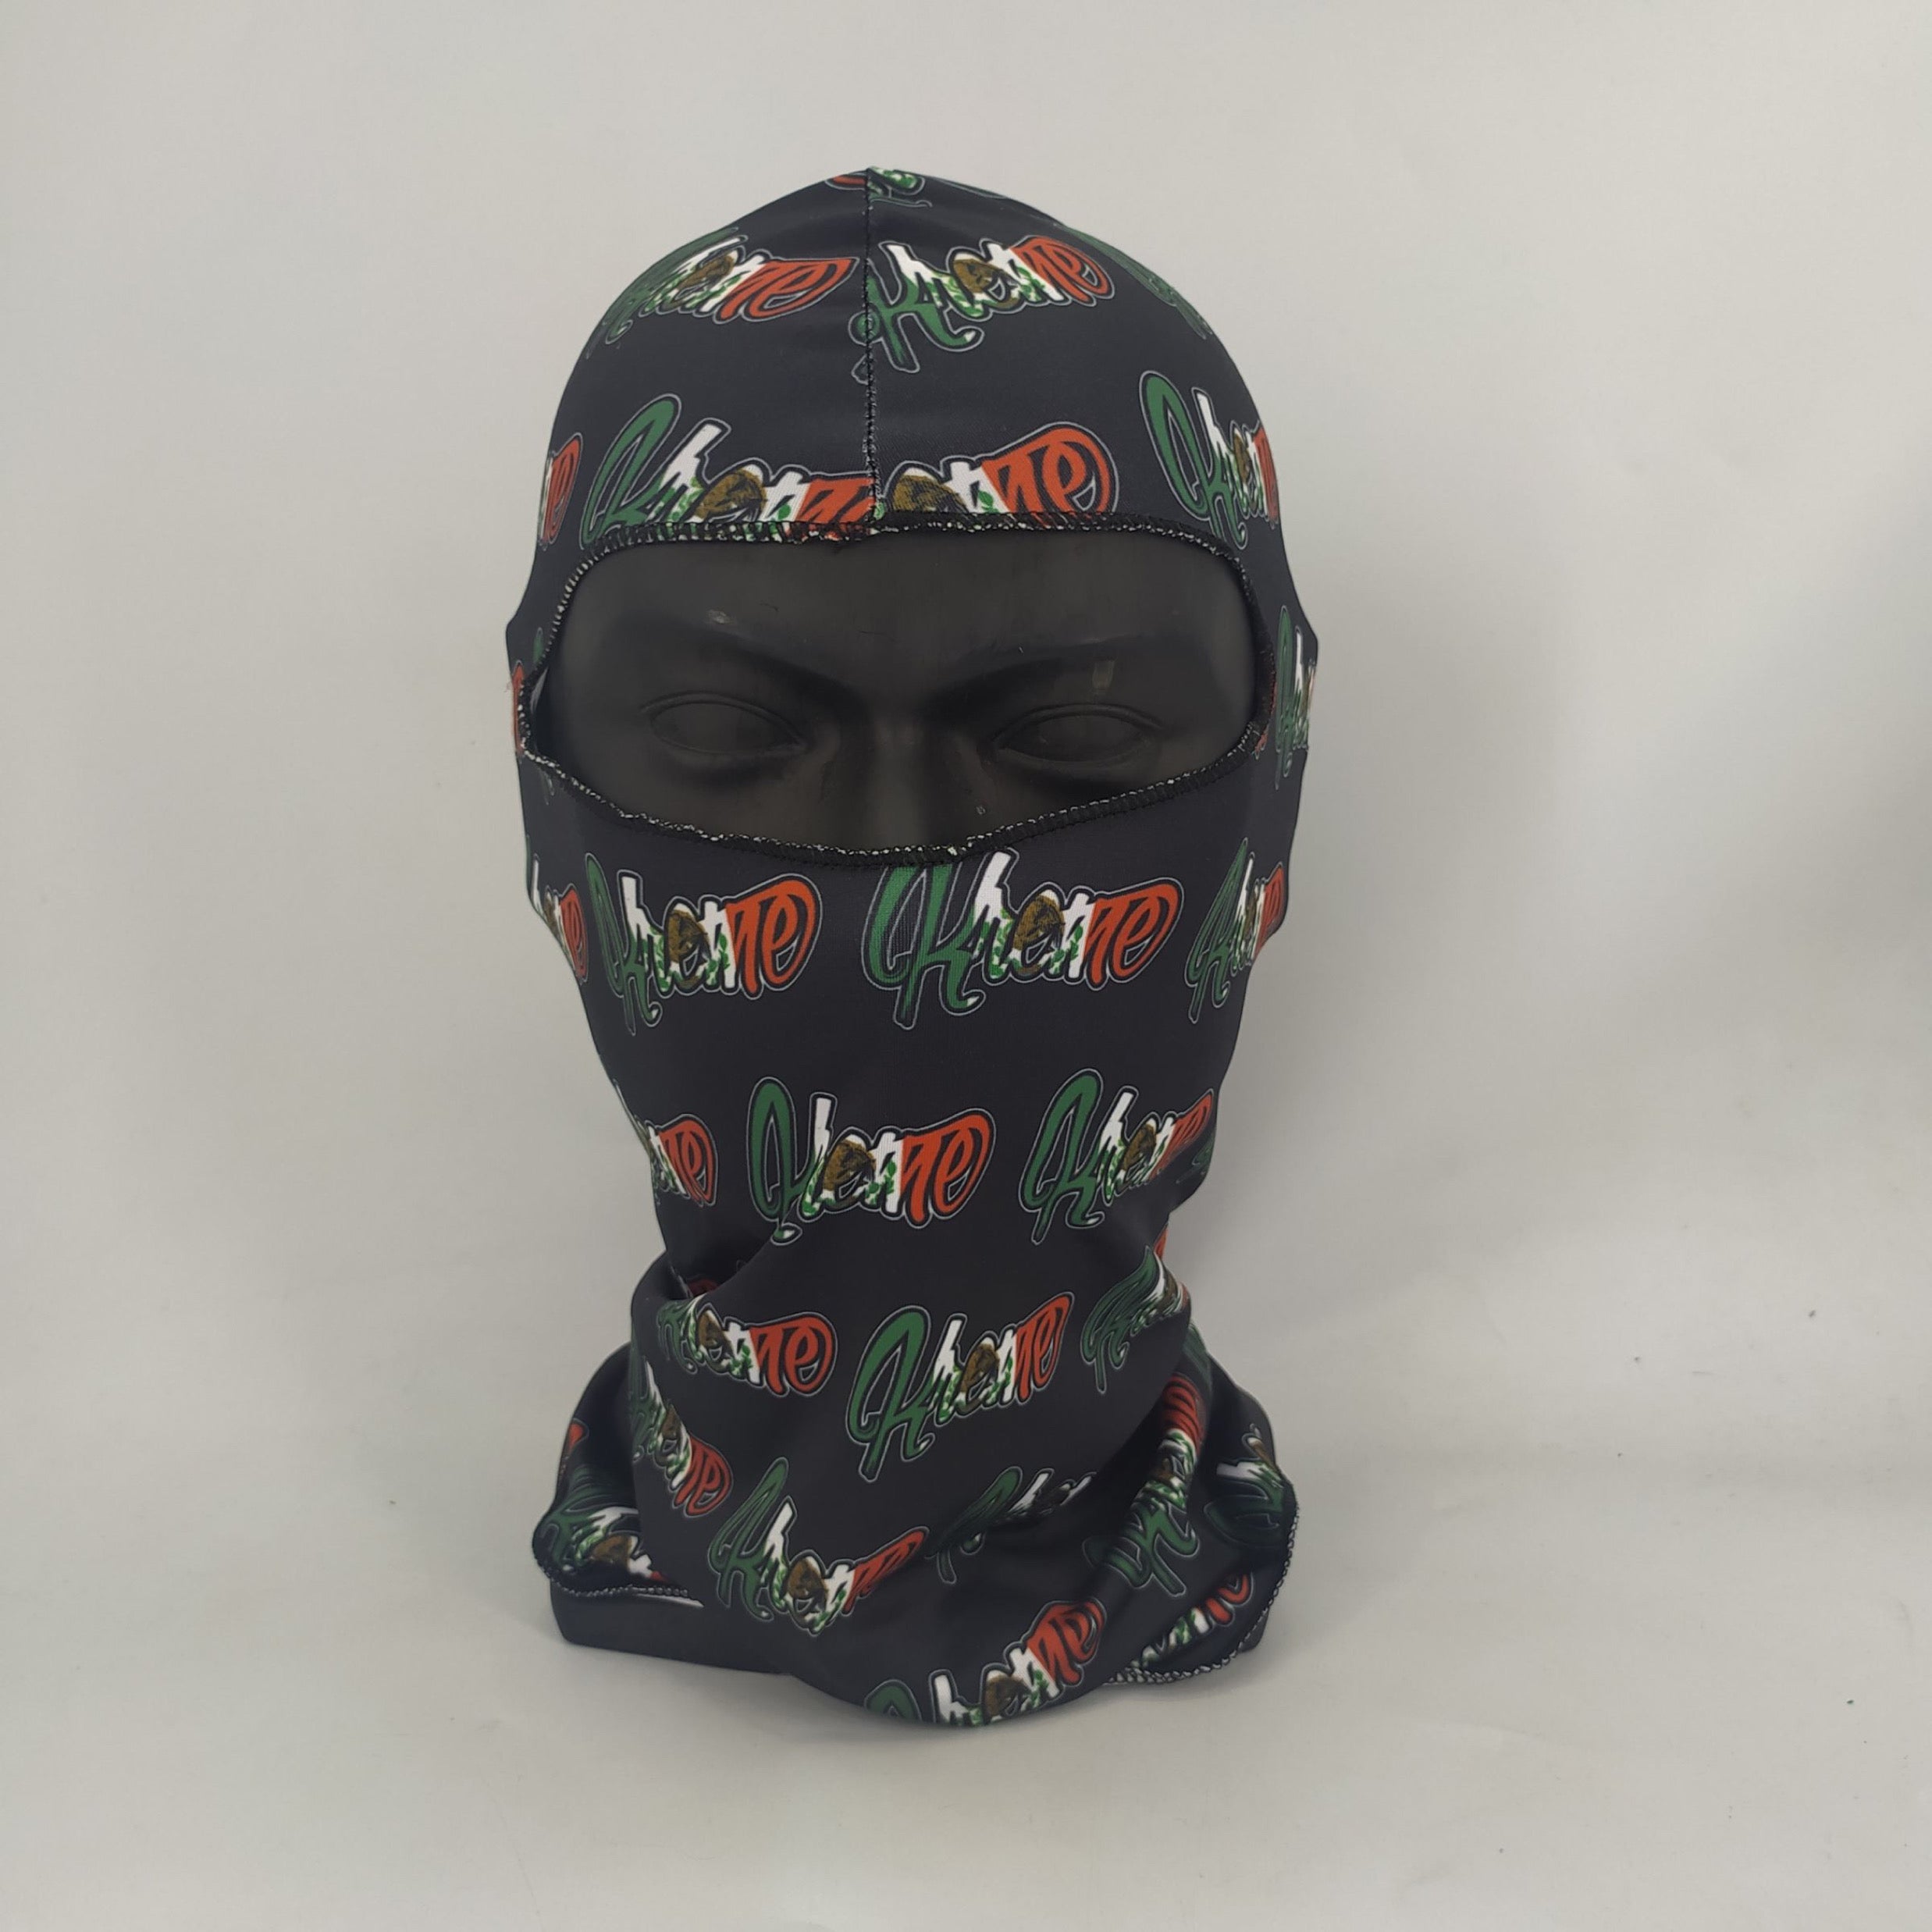 Mexico Graphic Balaclava Ski Mask 2 Pack Limited Deal One Size